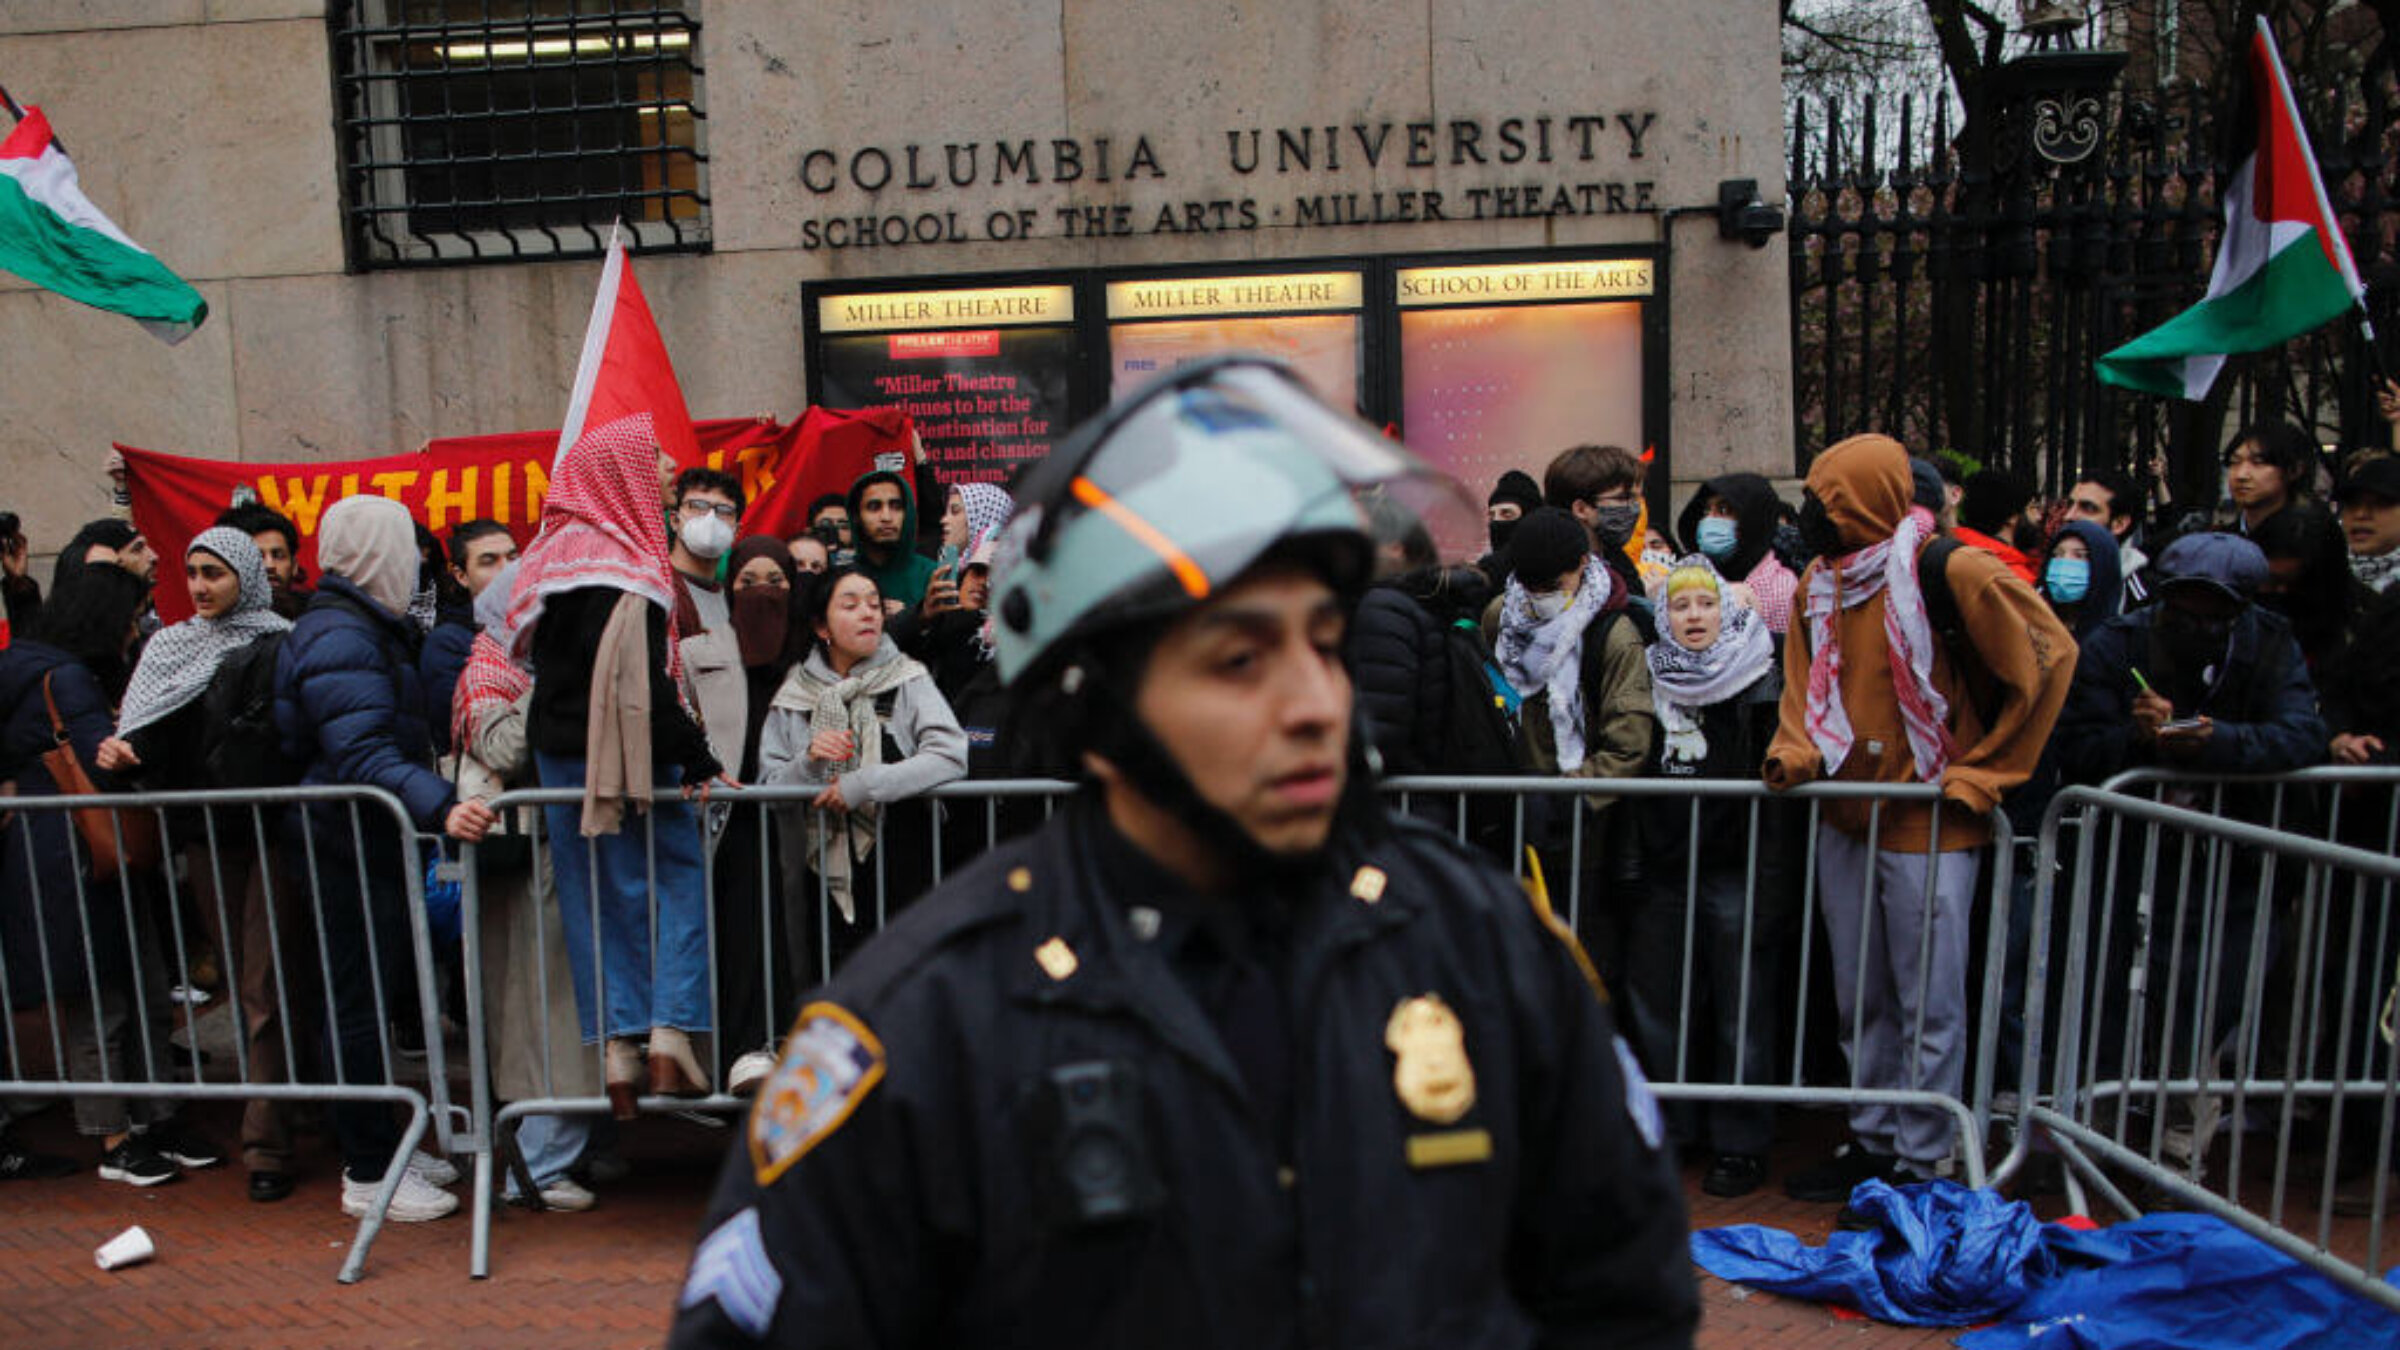 After campus arrests, Columbia's student newspaper speaks out – The Forward